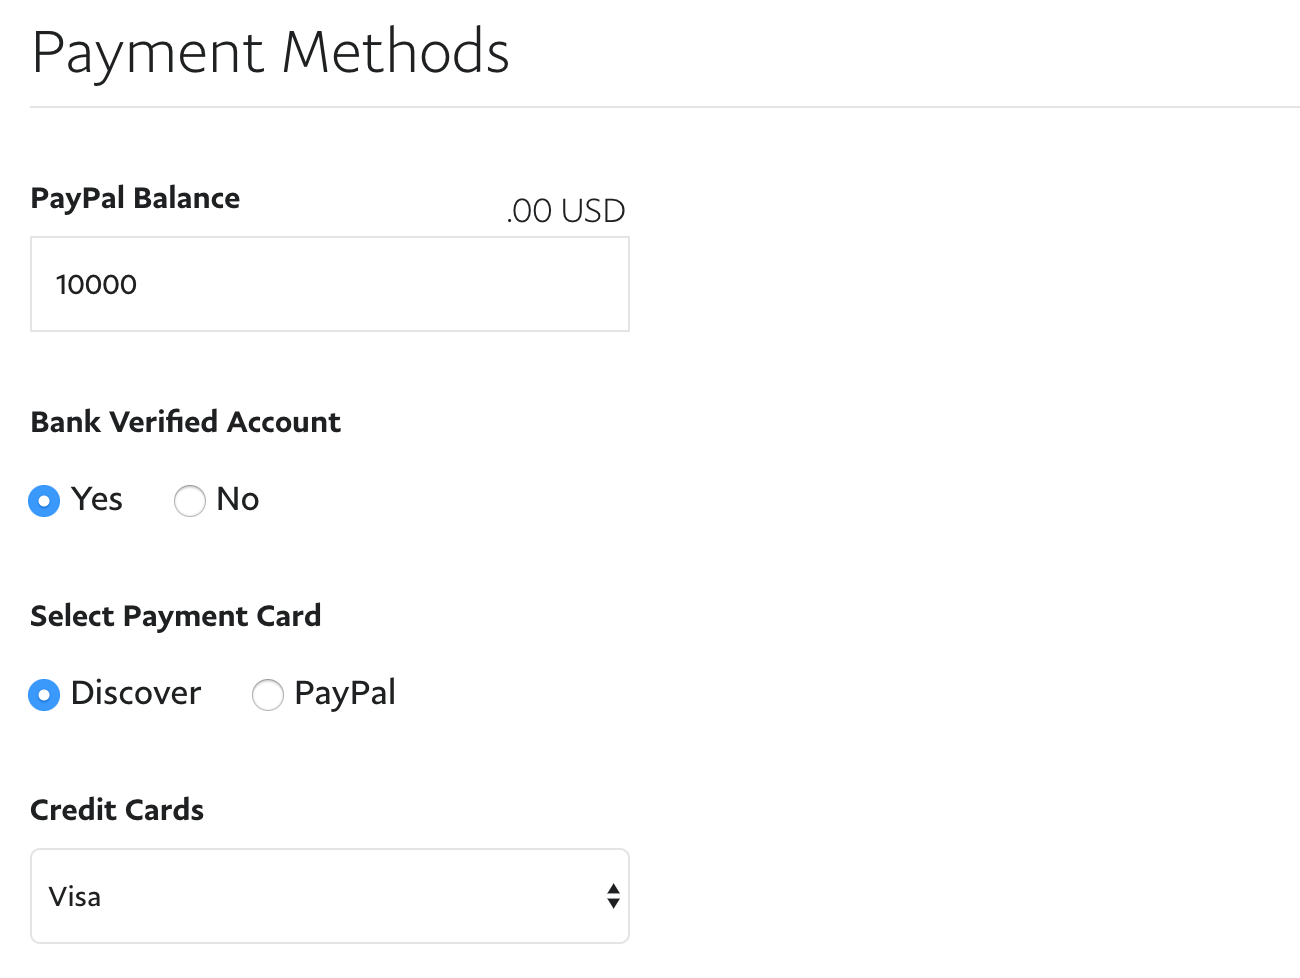 Getting started with PayPal Express Checkout